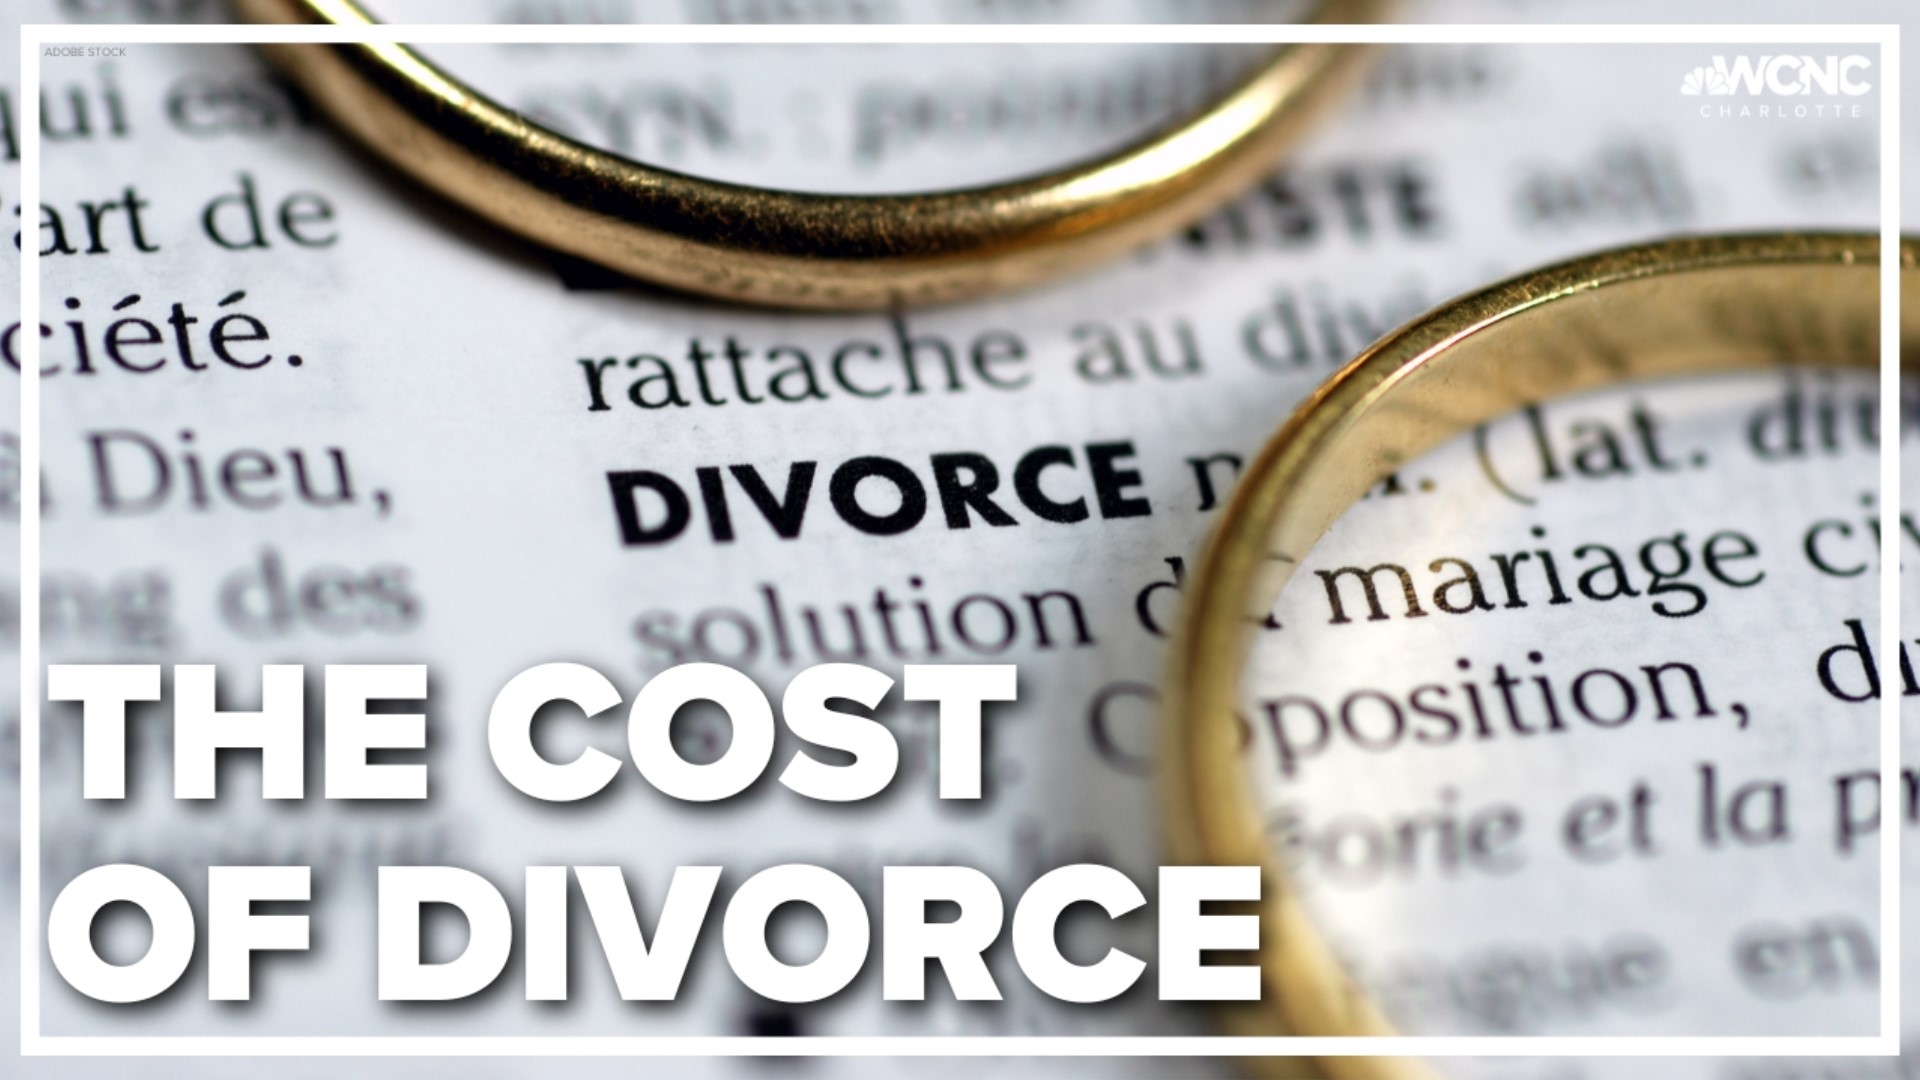 There’s no question – divorce is messy. And it can be very expensive costing thousands of dollars.